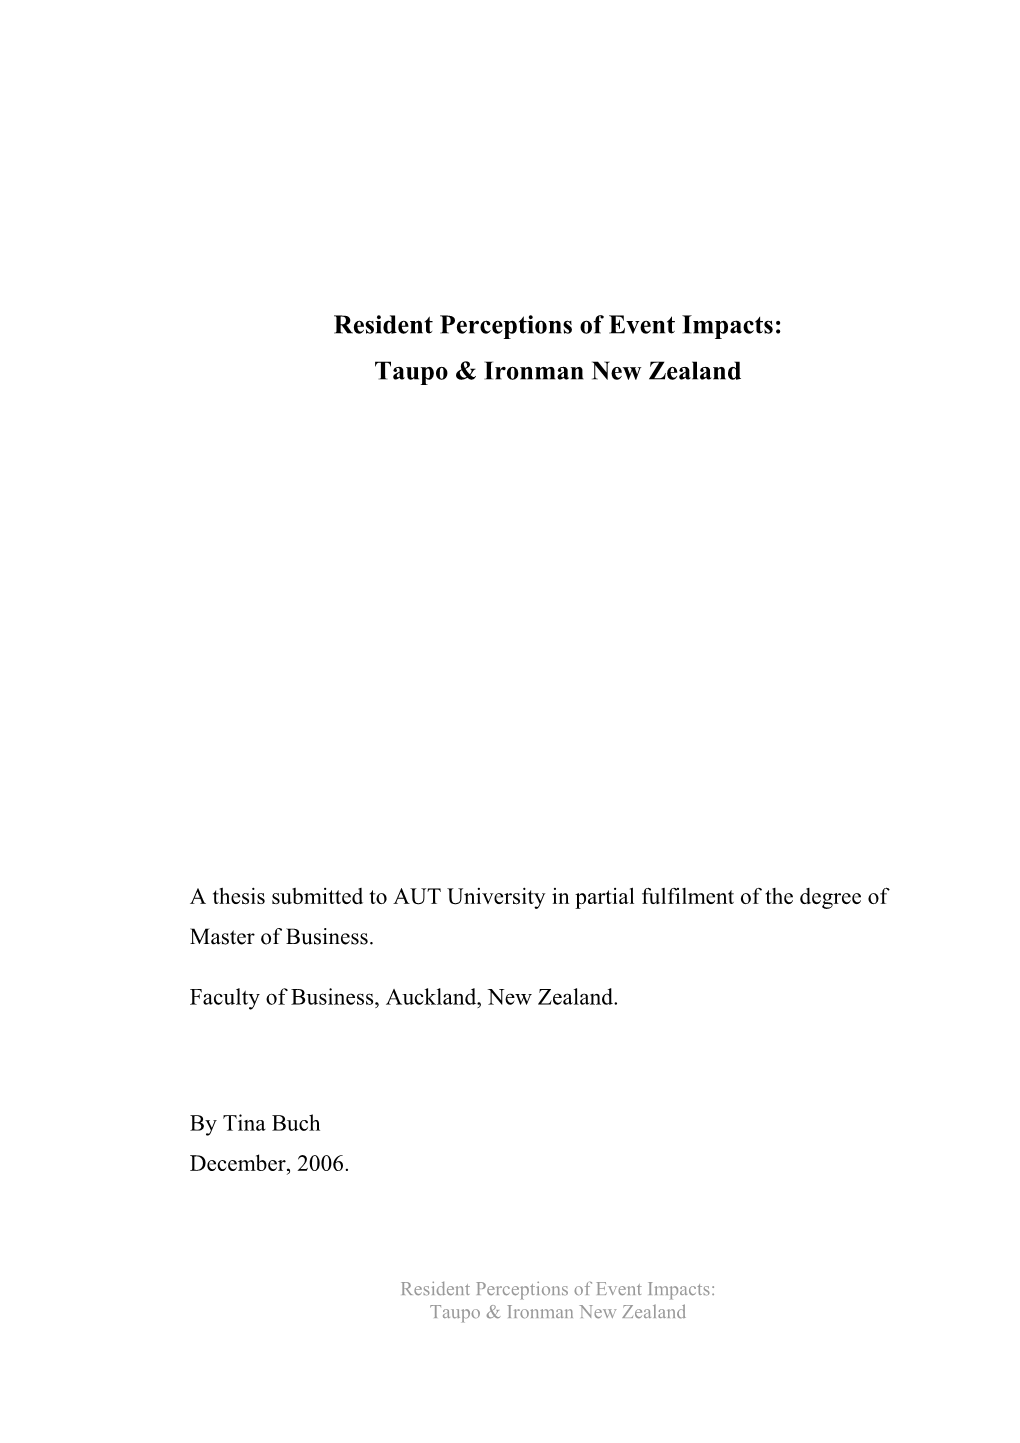 Resident Perceptions of Event Impacts: Taupo & Ironman New Zealand